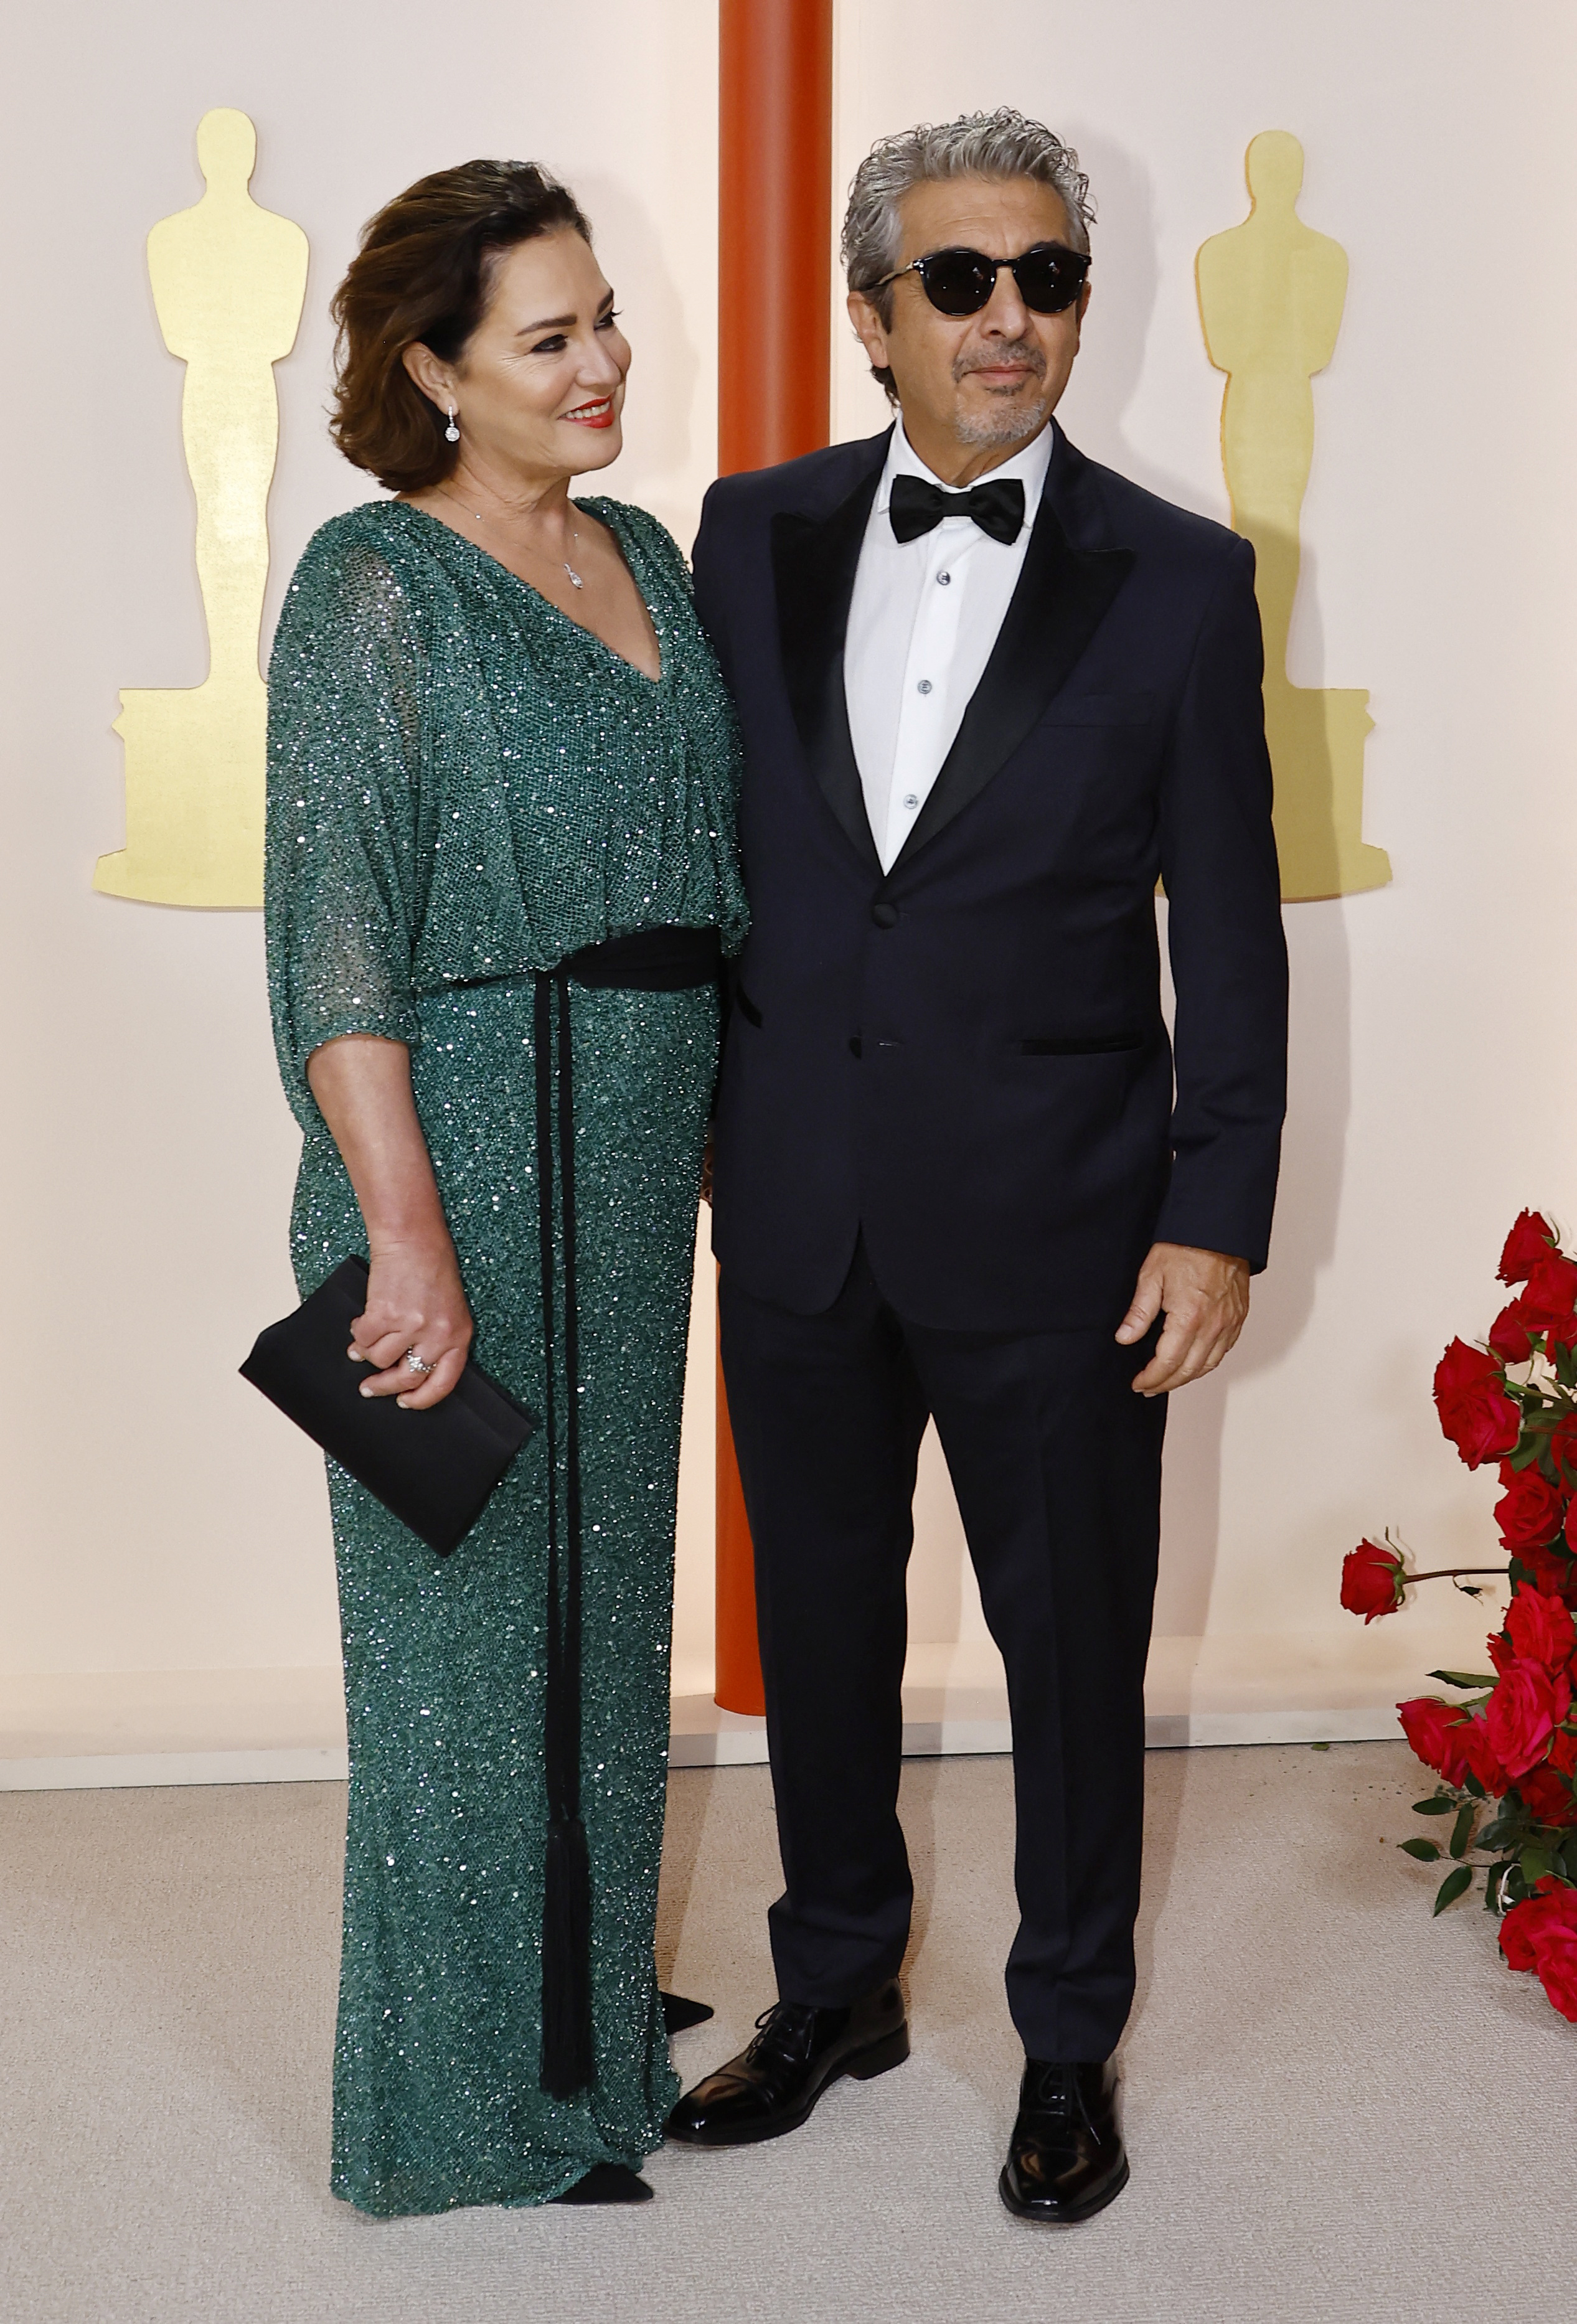 Ricardo Darin and Florencia Bas pose on the champagne-colored red carpet during the Oscars arrivals at the 95th Academy Awards in Hollywood, Los Angeles, California, U.S., March 12, 2023. REUTERS/Eric Gaillard